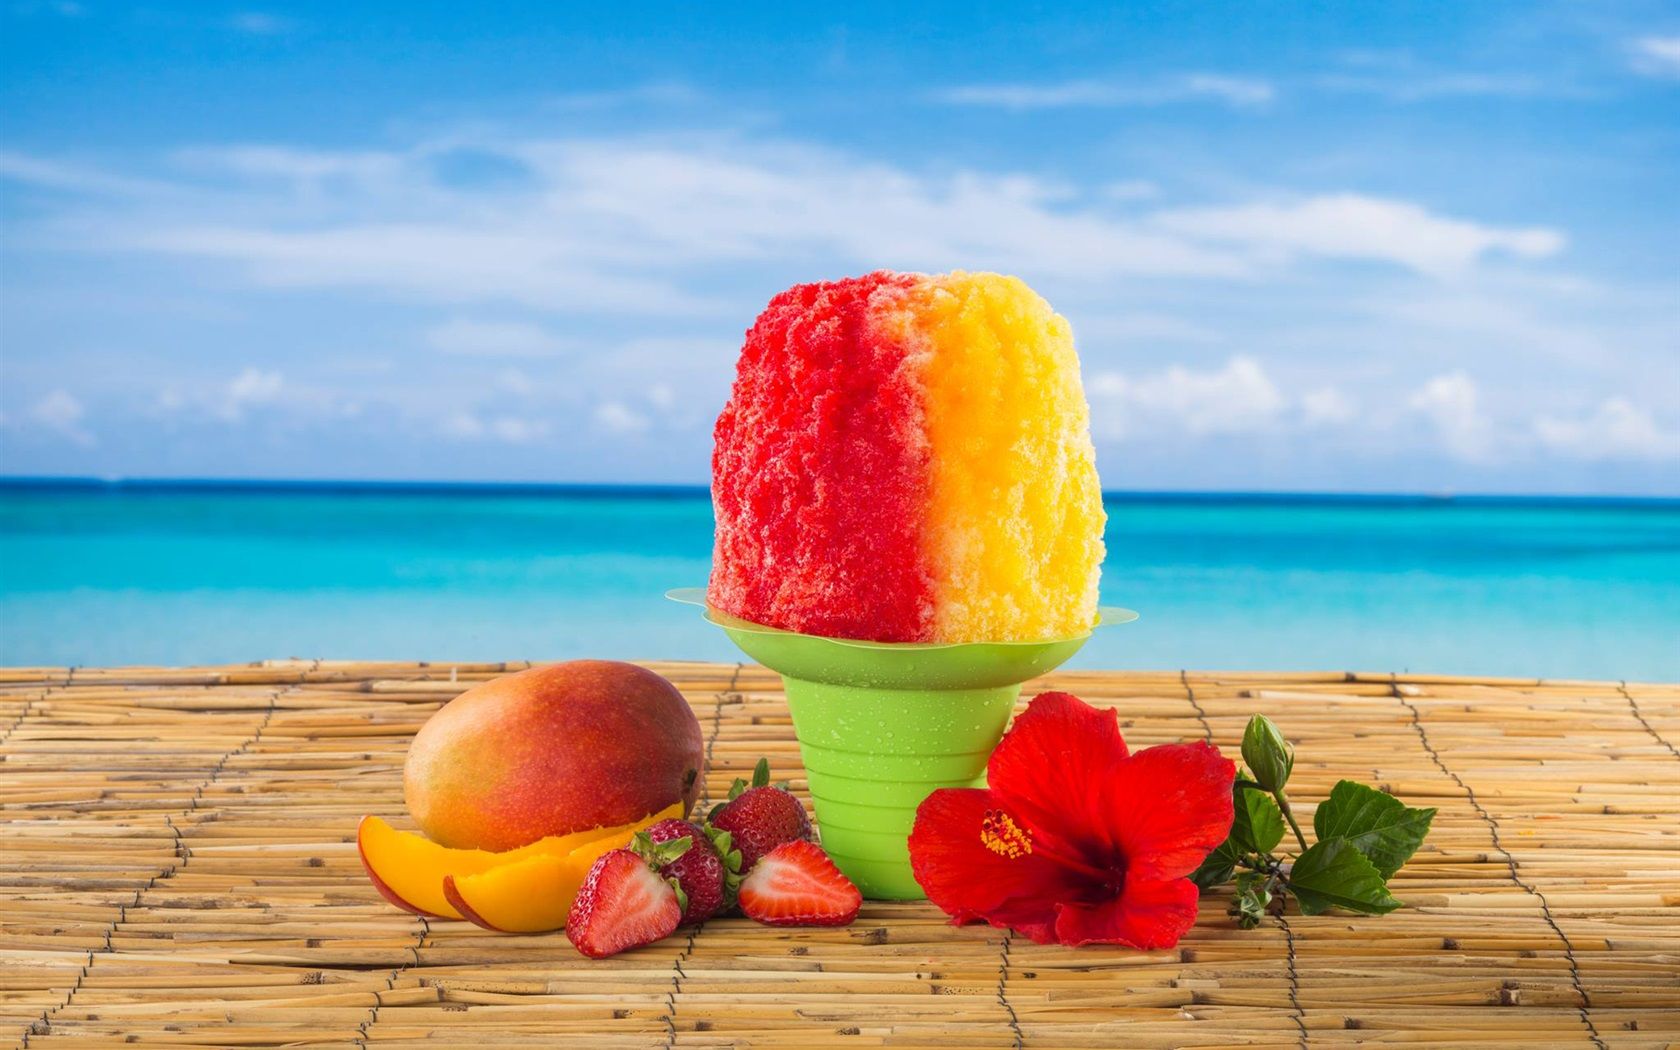 Wallpaper Red orange colors shaved ice, strawberries, mango, flower, sea 1920x1200 HD Picture, Image